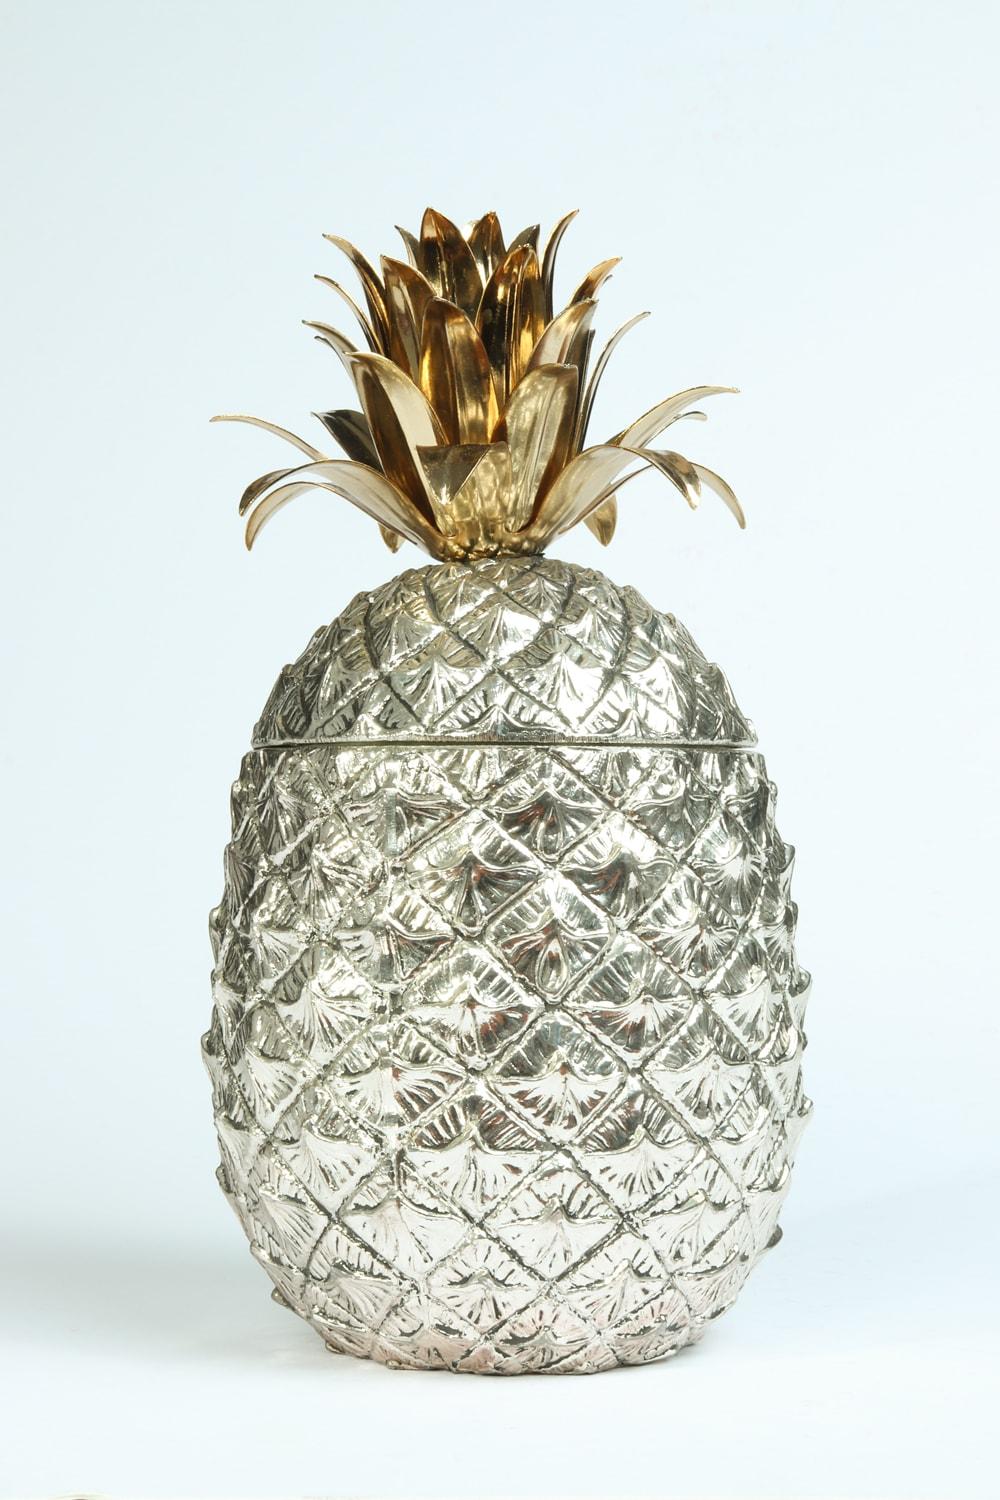 Italian “Pineapple” Ice bucket by Mauro Manetti circa 1960

 

Pineapple ice bucket designed by Mauro Manetti and produced by Fonderia d’Arte Firenze in Italy in the 1960s, this is the best condition one that I have seen it looks to never have